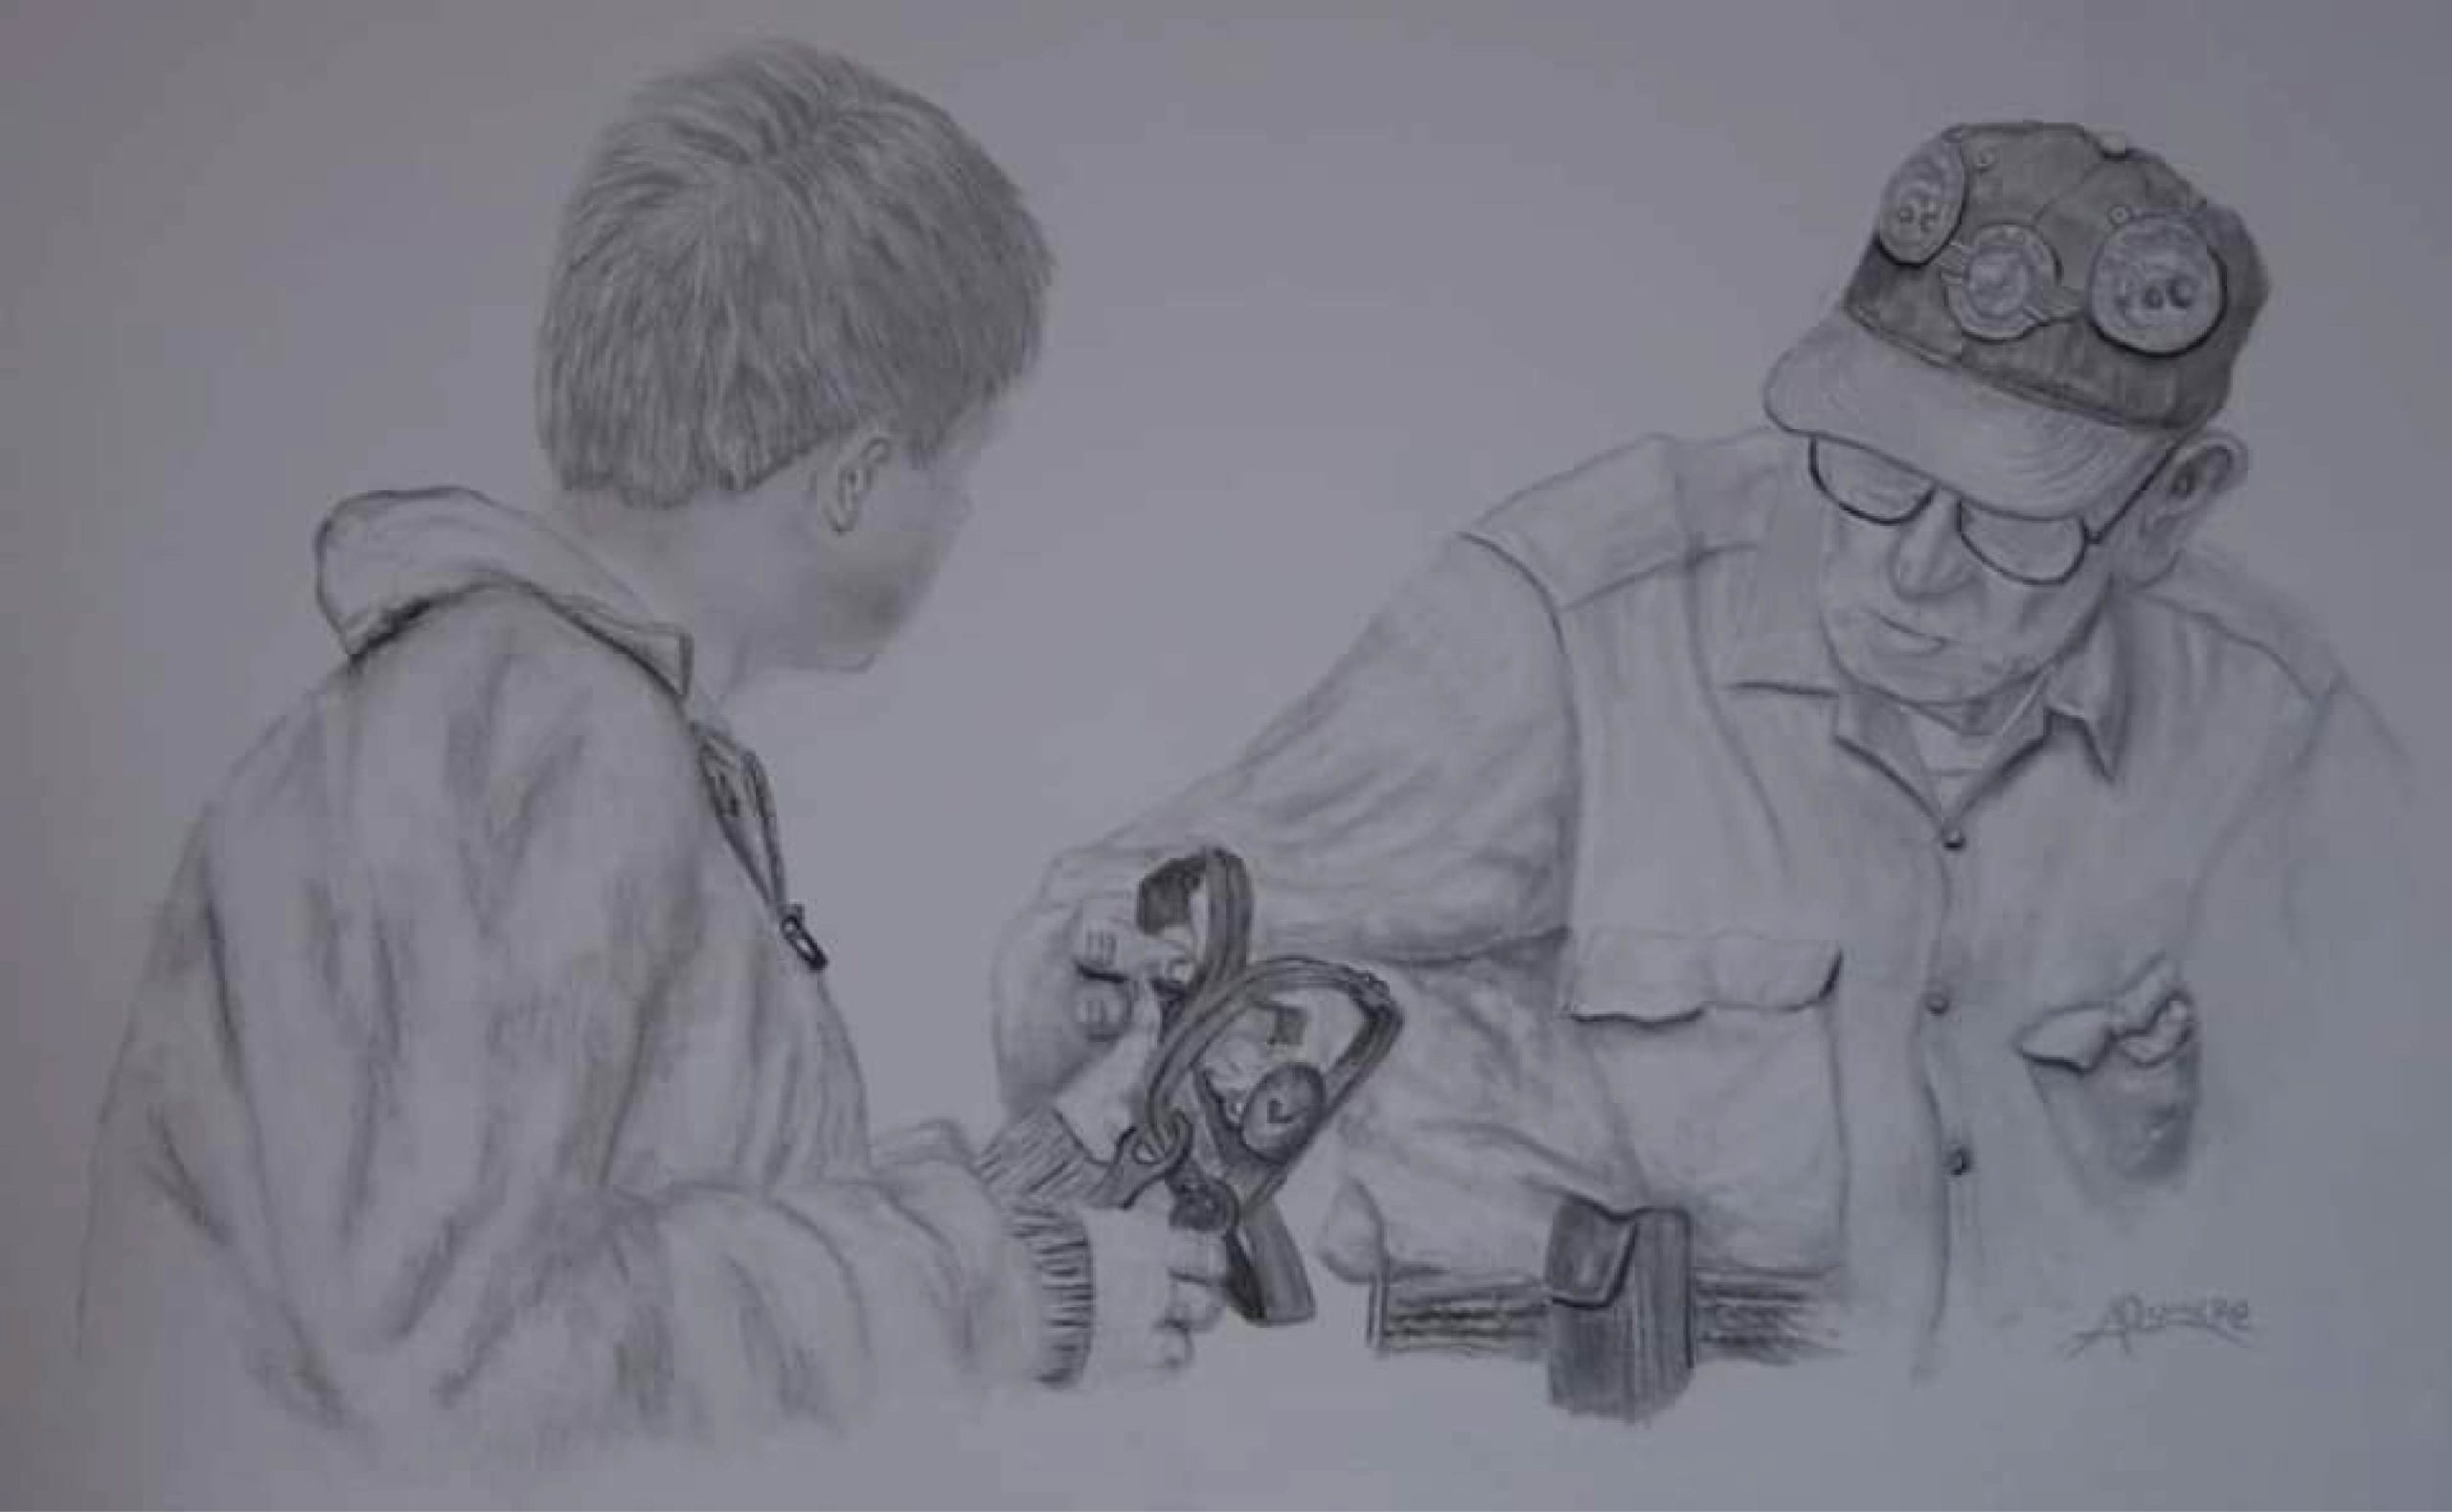 A pencil sketch by Adrian Romero depicting an old verteran teaching trapping to a young boy